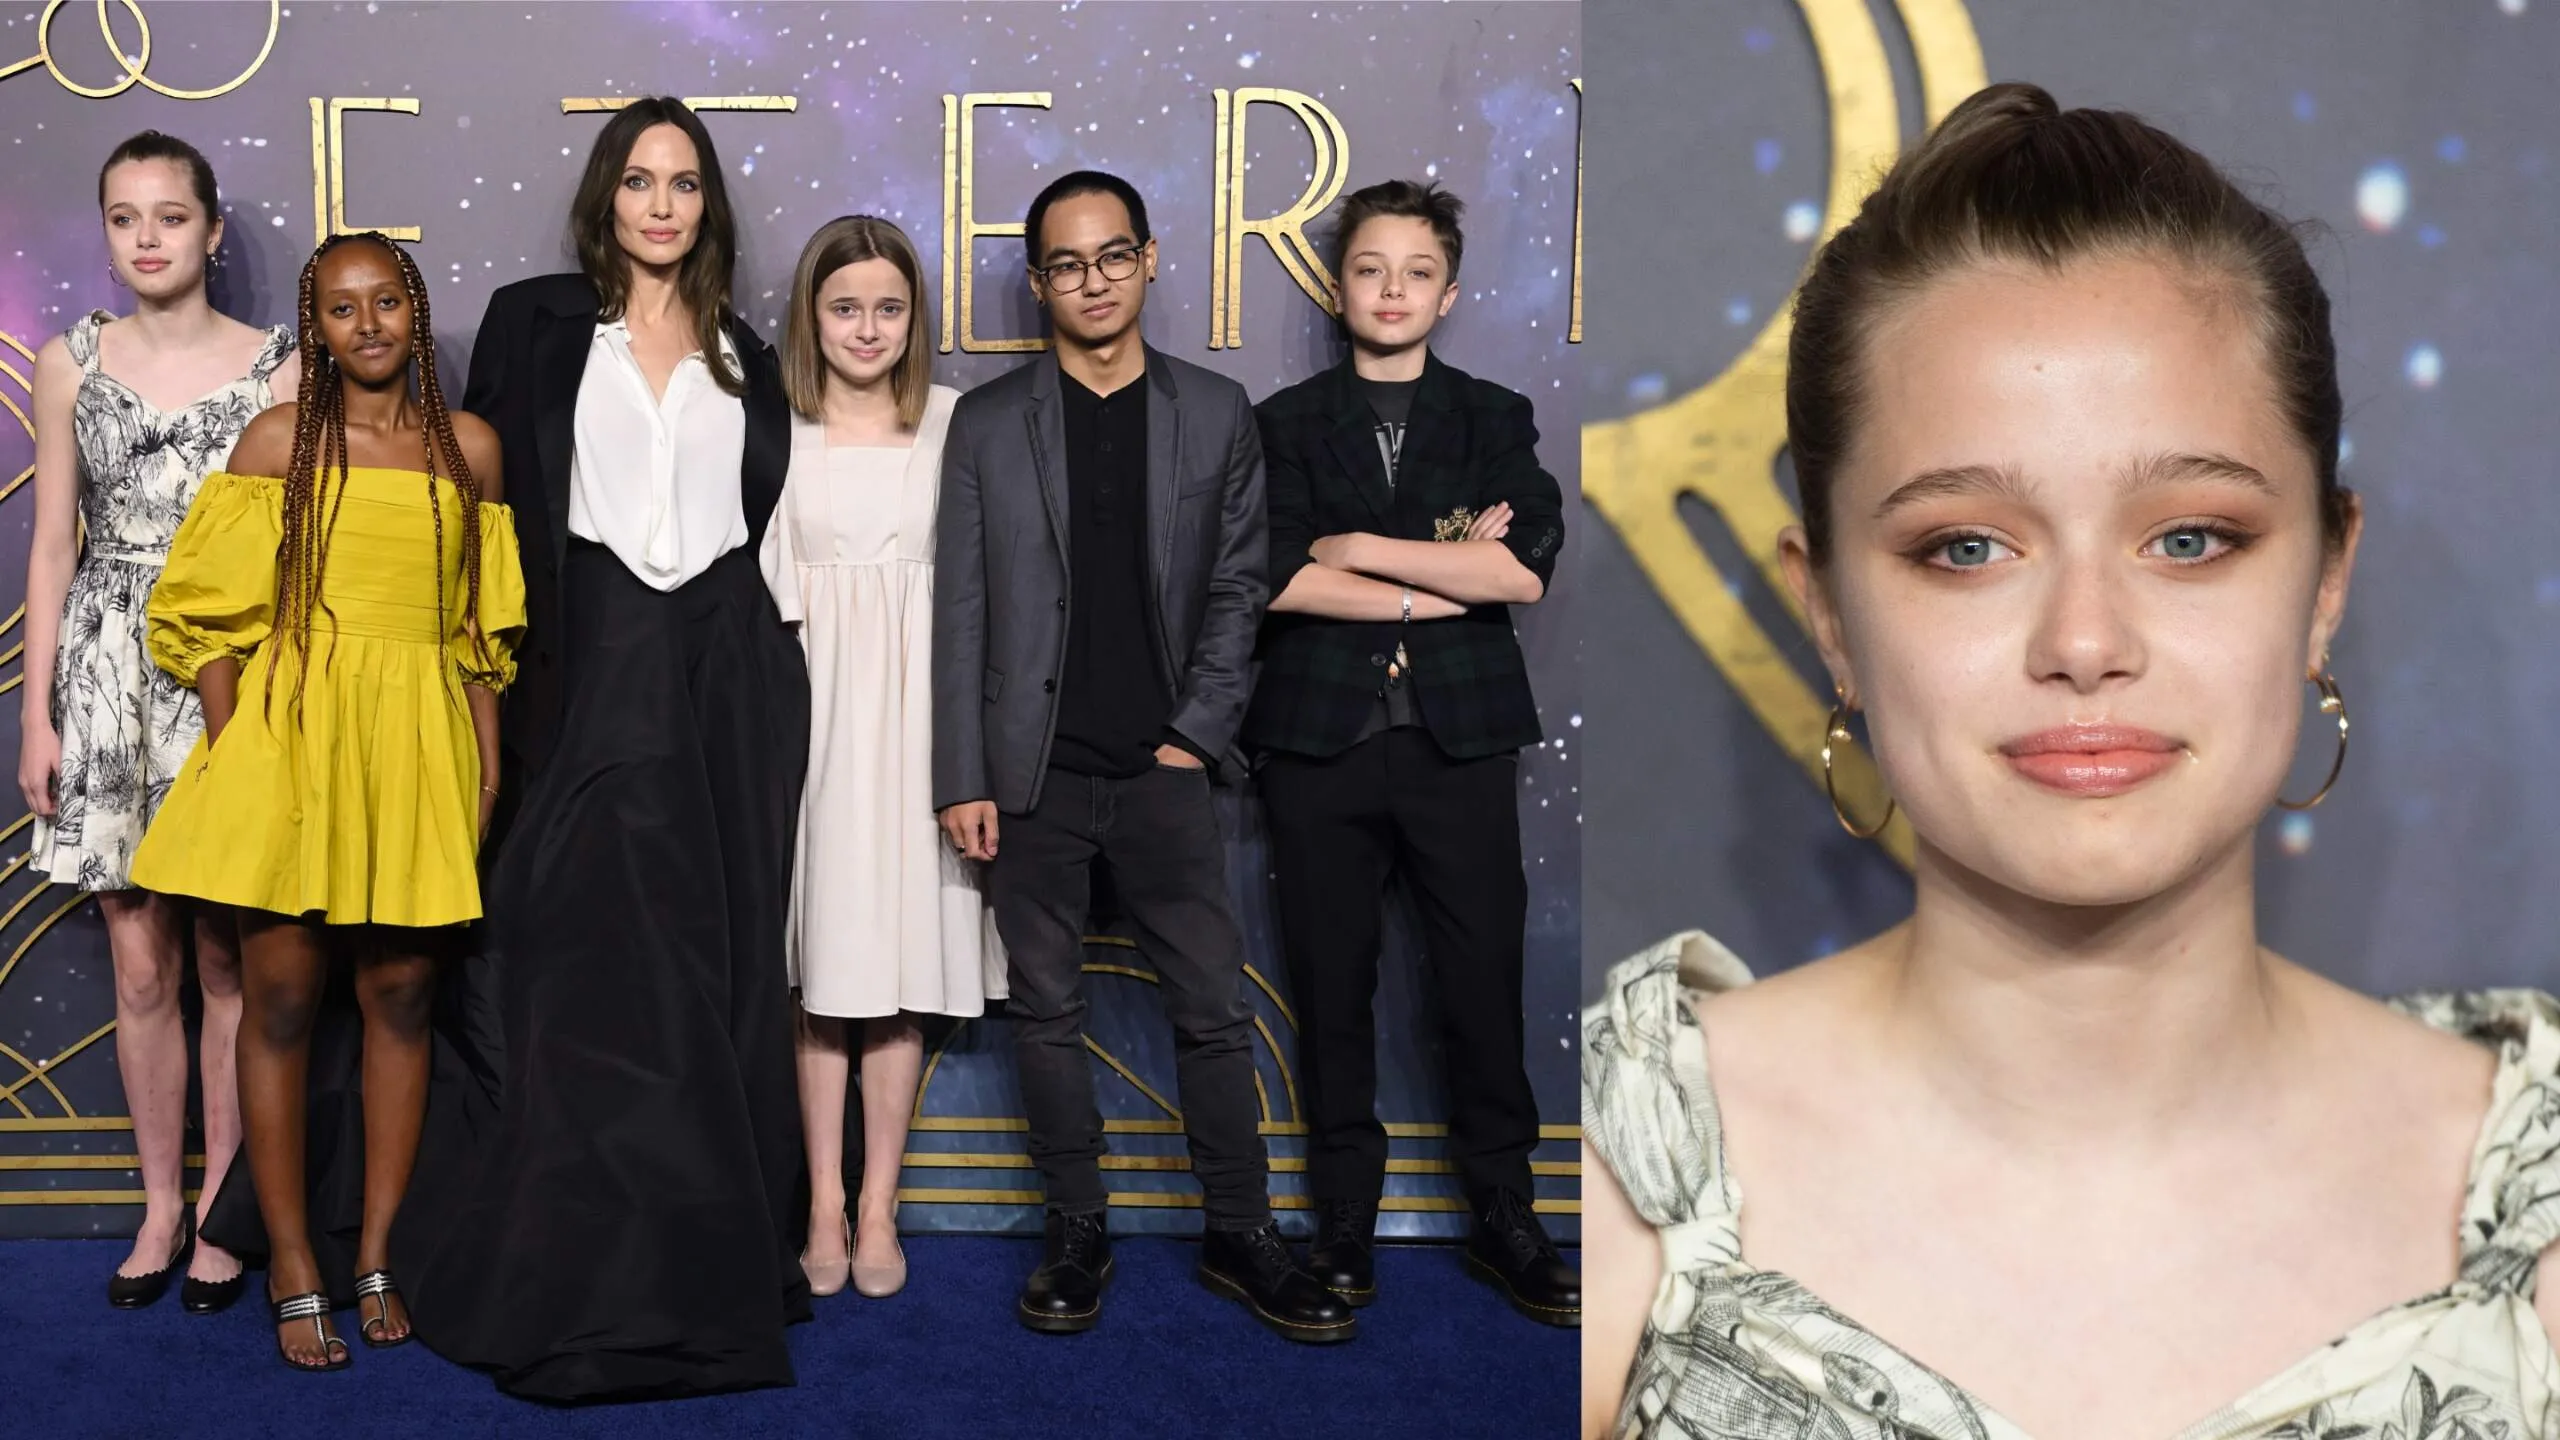 Actor Angelina Jolie and her kids attend the Eternals premiere alongside a photo of Shiloh